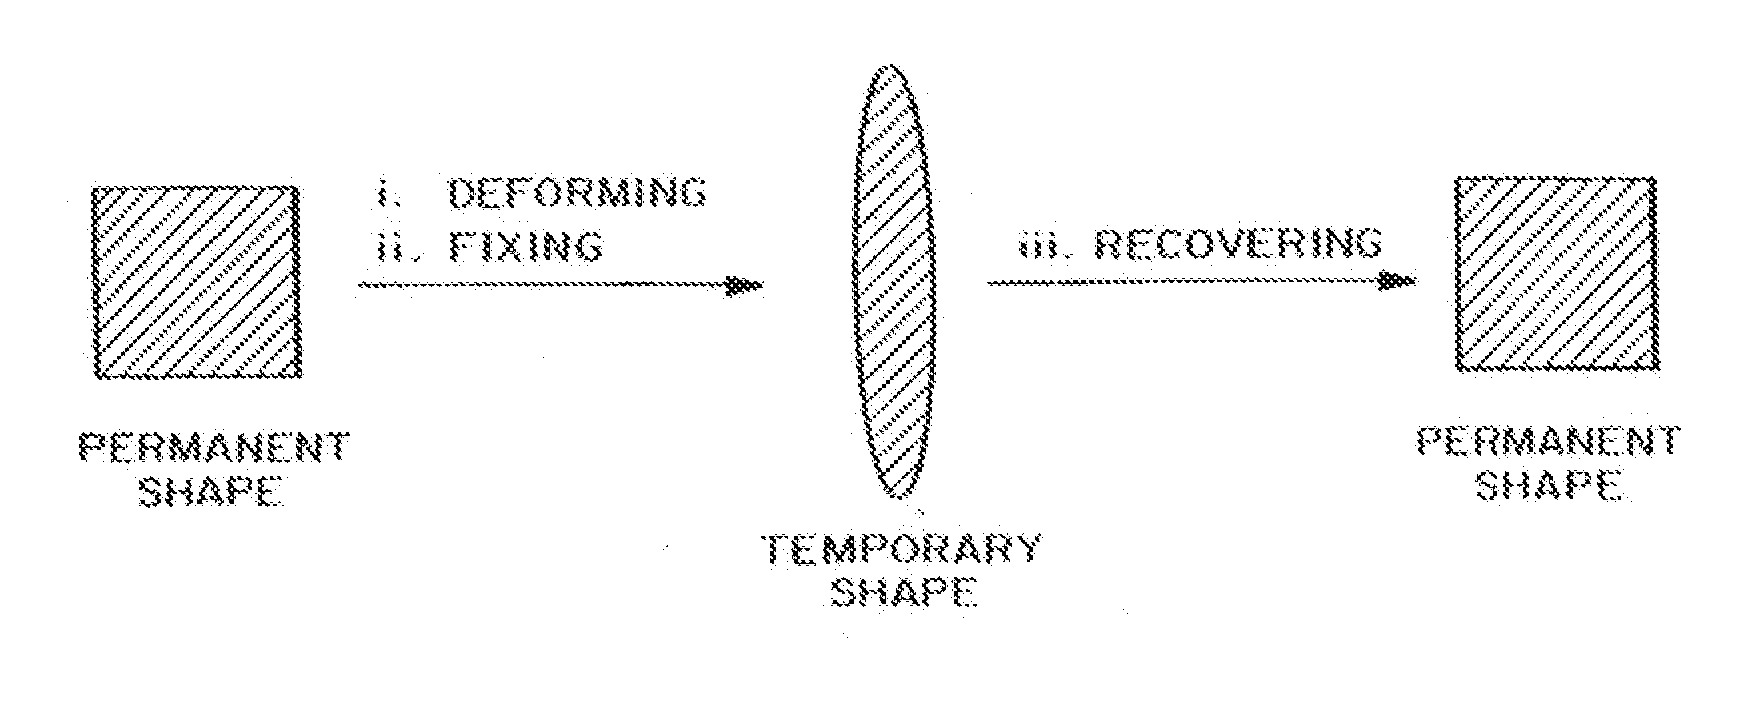 Biodegradable Shape Memory Polymeric Sutures